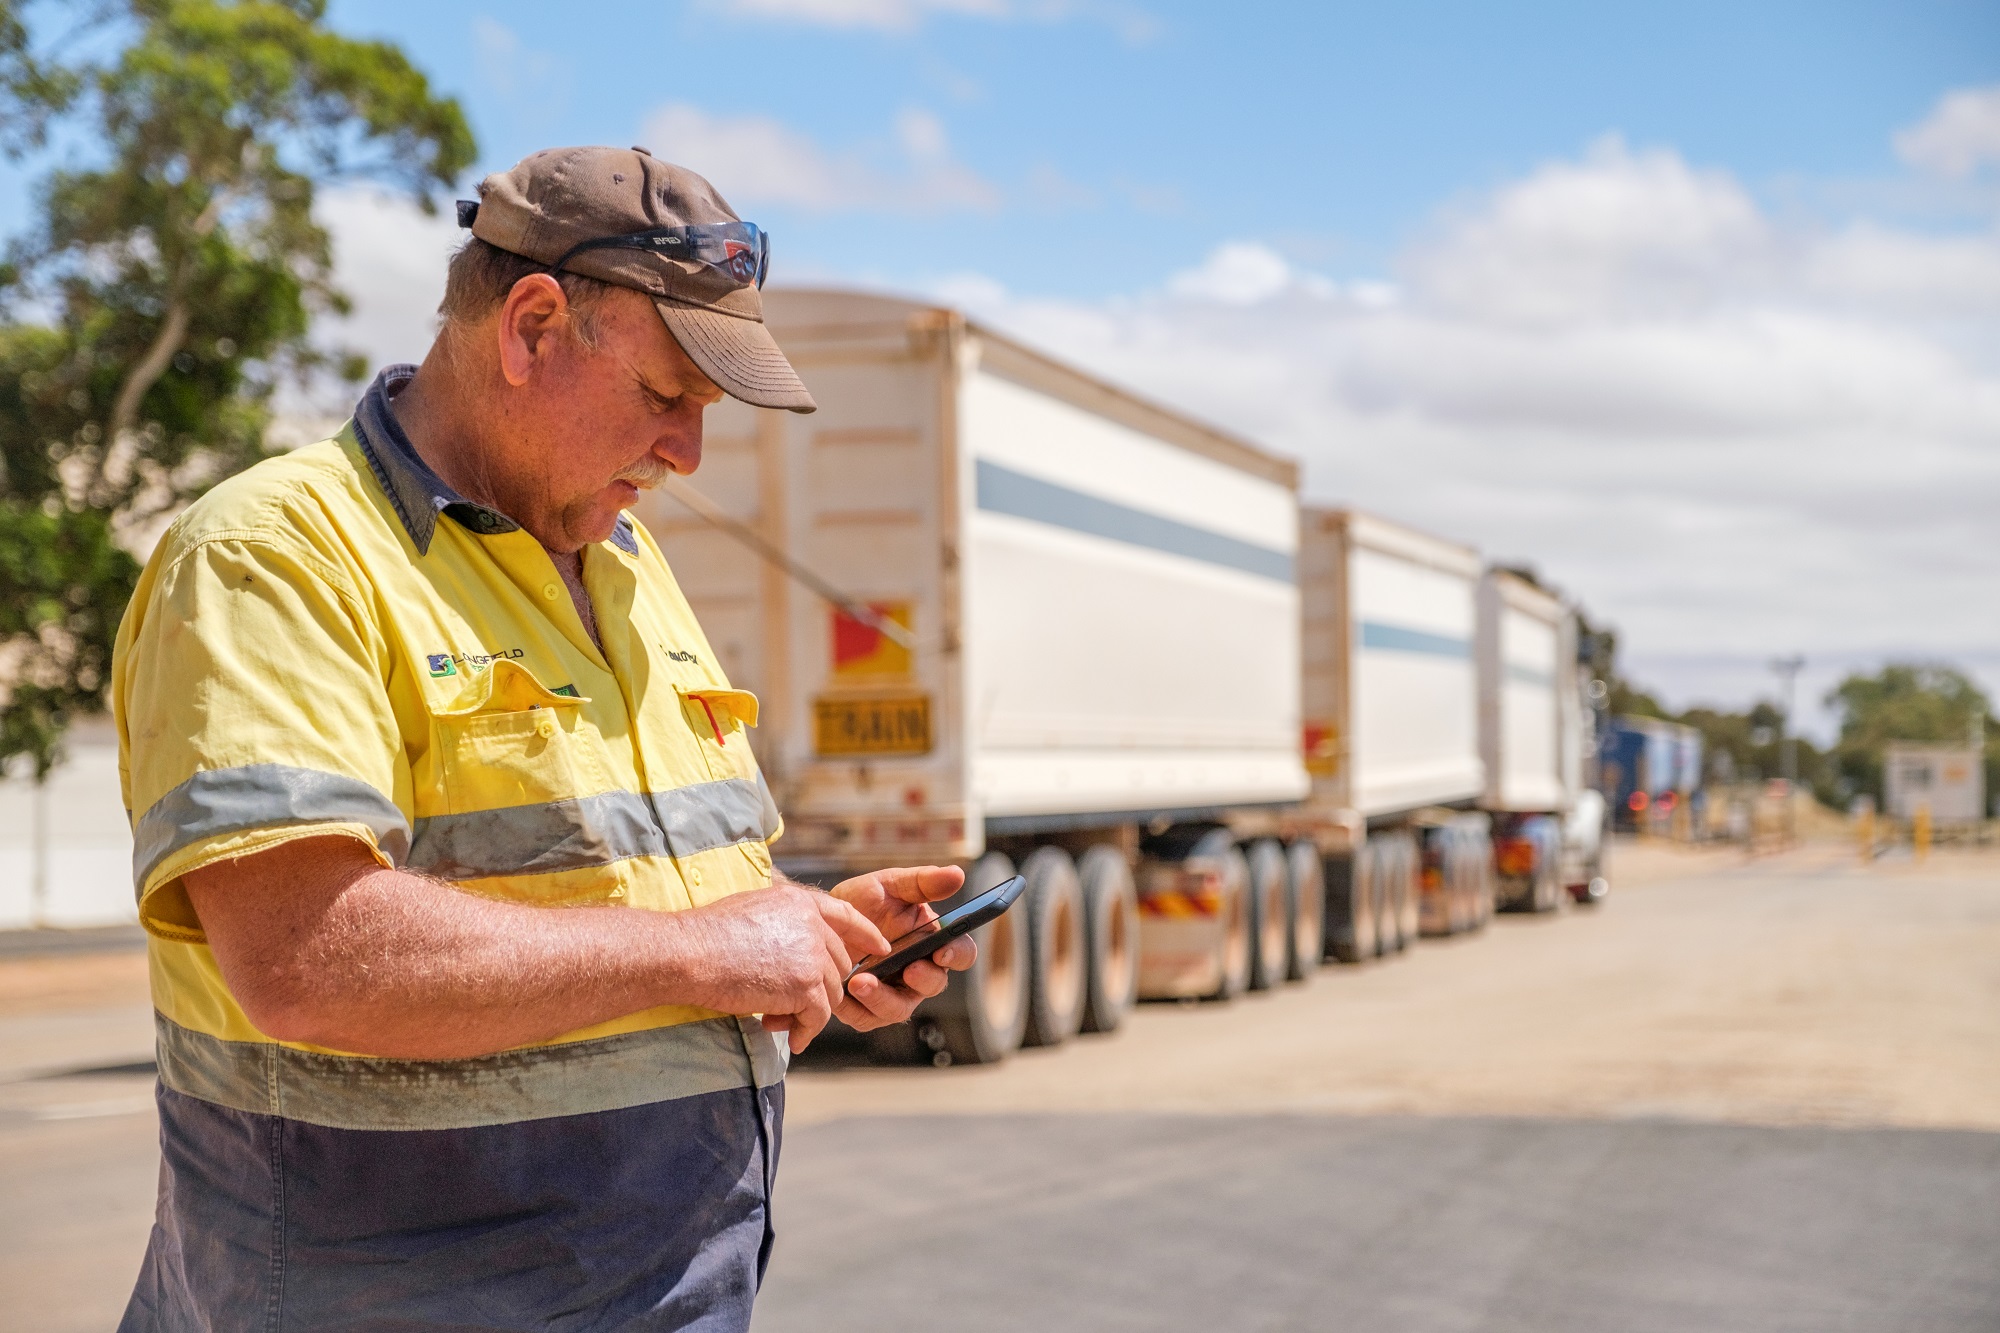 Man in hi vis looking at phone in front of truck